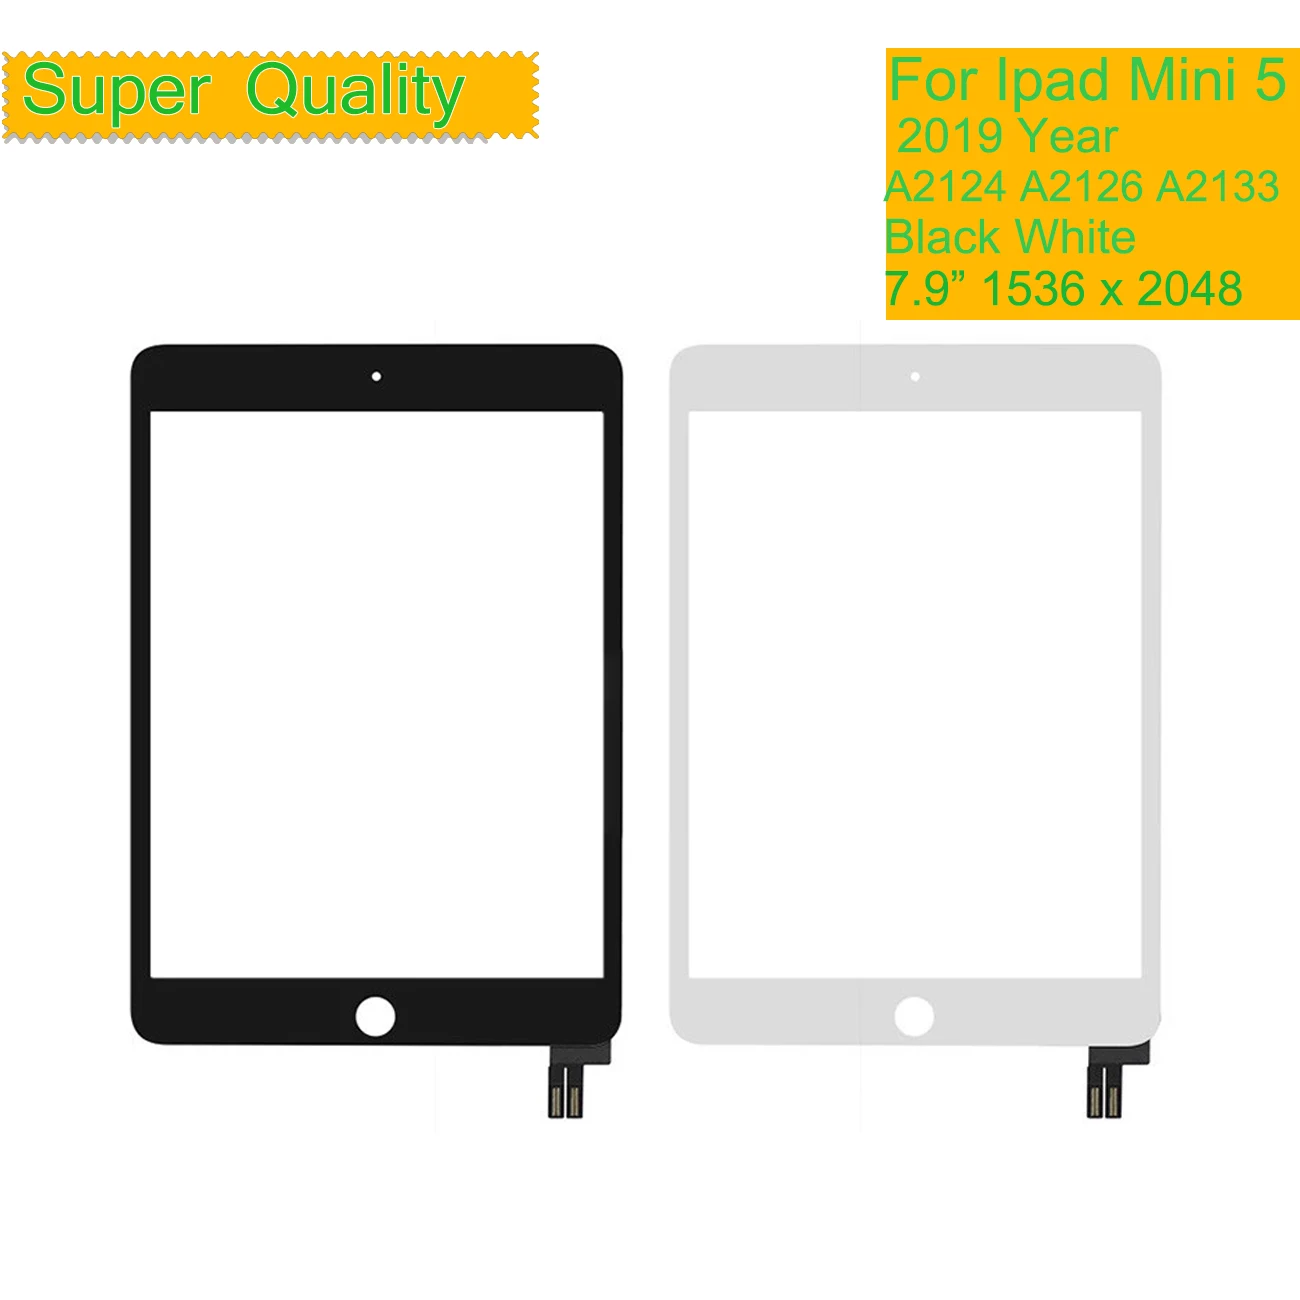 10Pcs/Lot For Apple iPad Mini 5 Touch Screen Digitizer Panel For iPad Mini 5 2019 A2124 A2126 A2133 LCD Front Outer Glass Sensor 10pcs lot 5 5 for lenovo a850 a 850 lcd touch screen digitizer sensor outer glass lens panel replacement